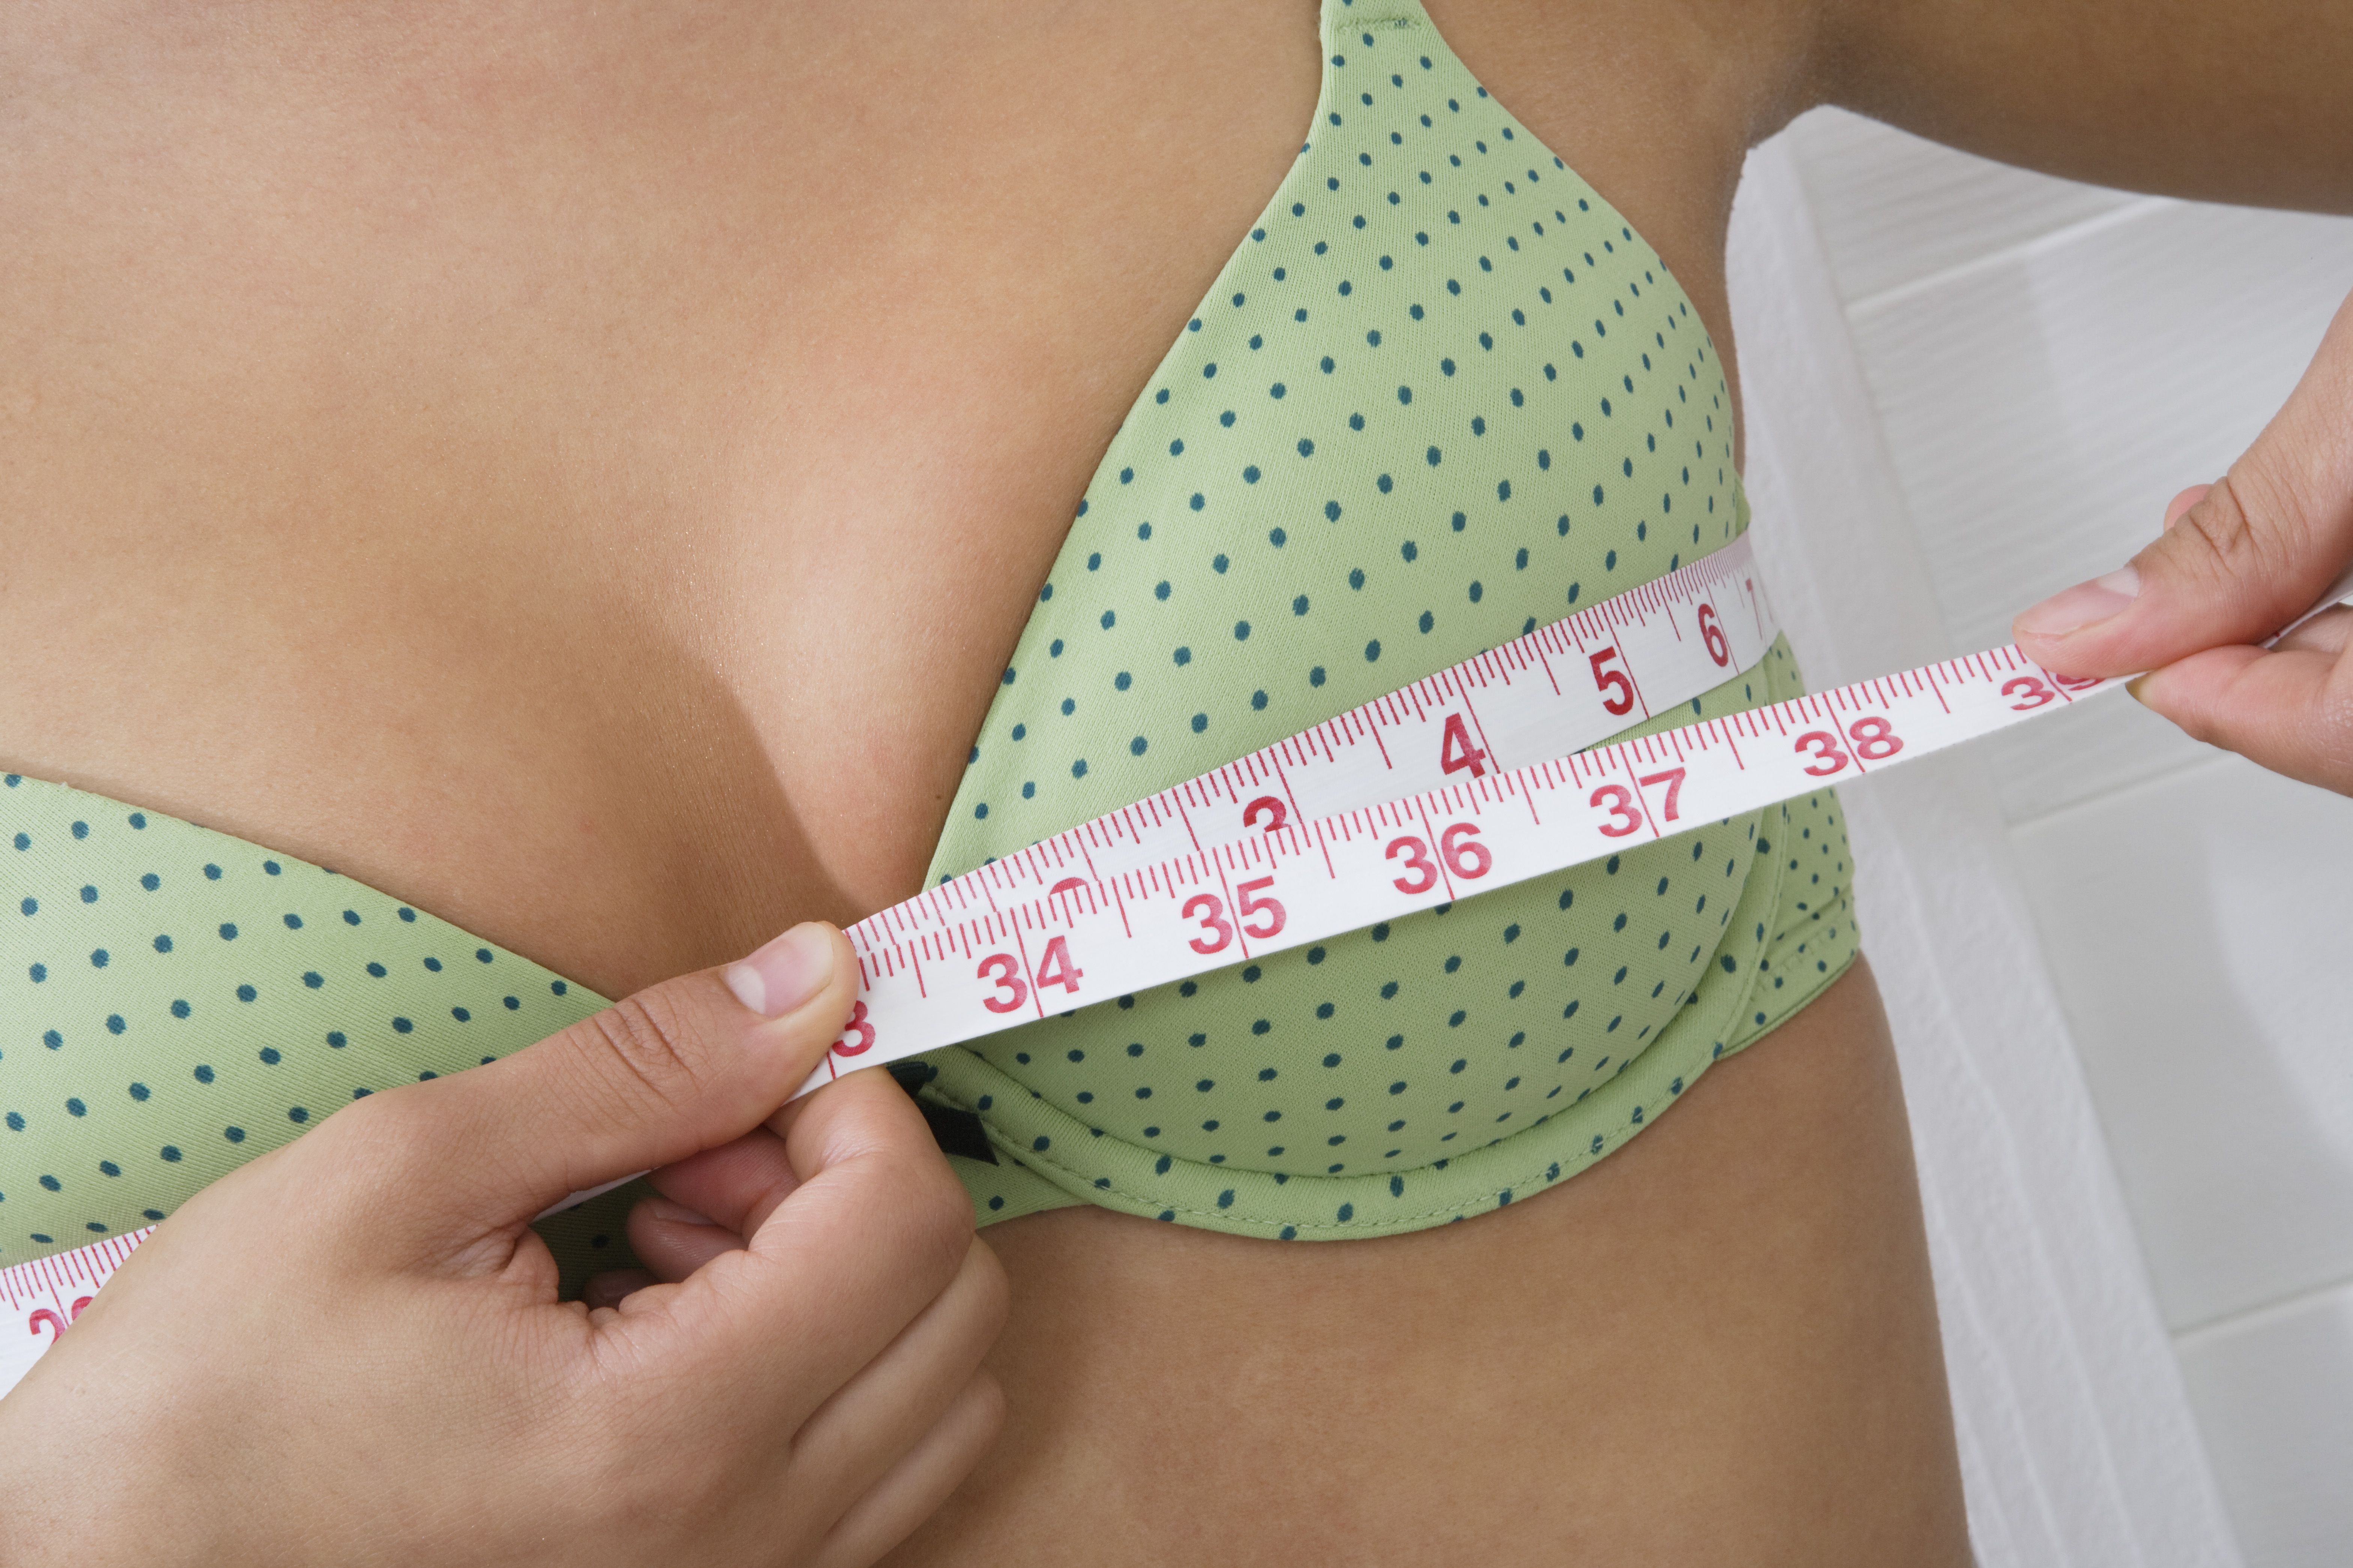 How to measure your bra size at home 4 simple steps photo pic